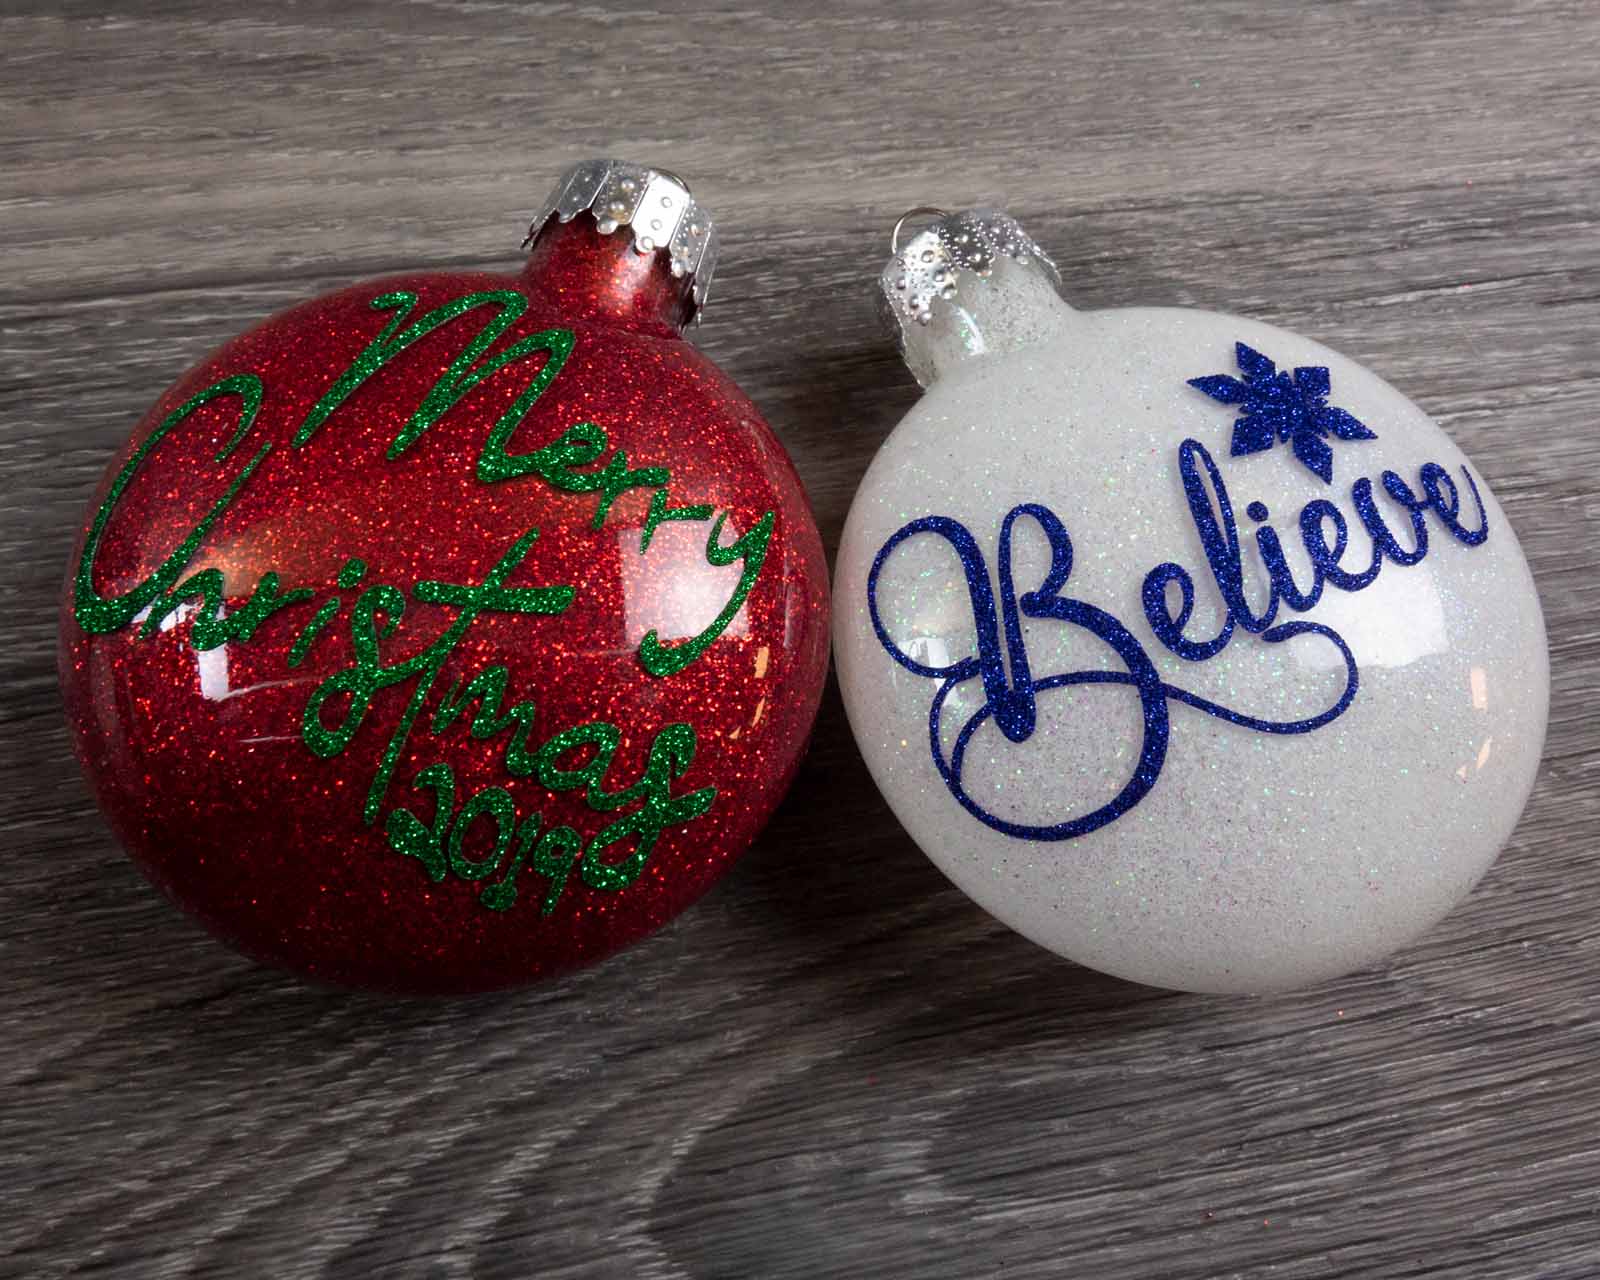 The final image of both completed ornaments using Pressure Sensitive GlitterFlex® Ultra